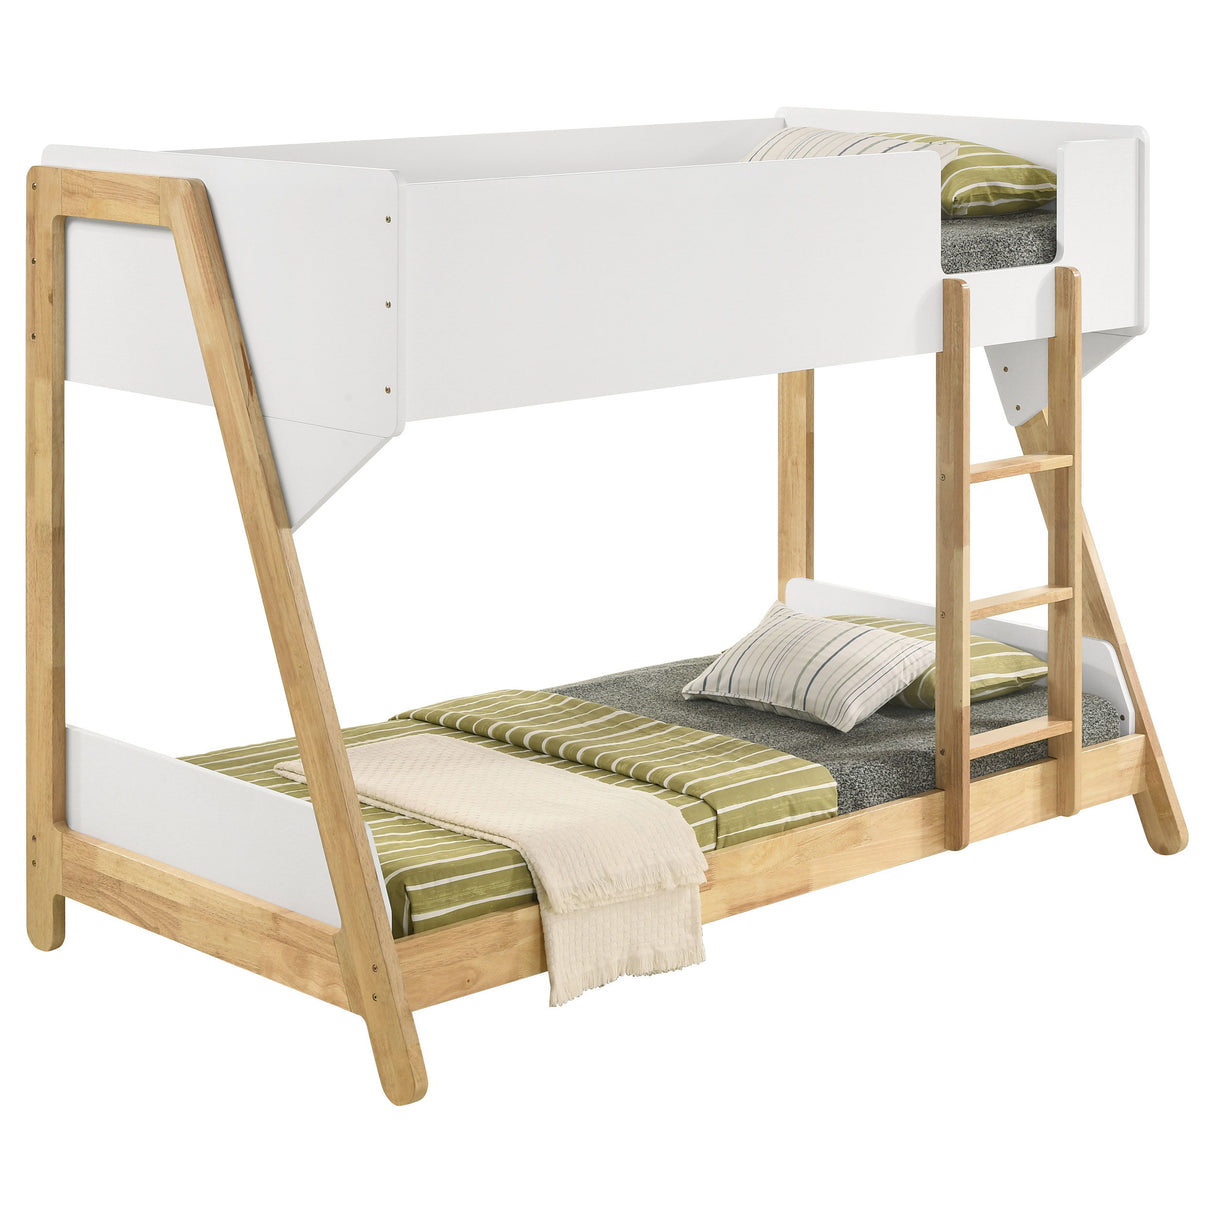 Wyatt - Wood Twin Over Twin Bunk Bed - White And Natural